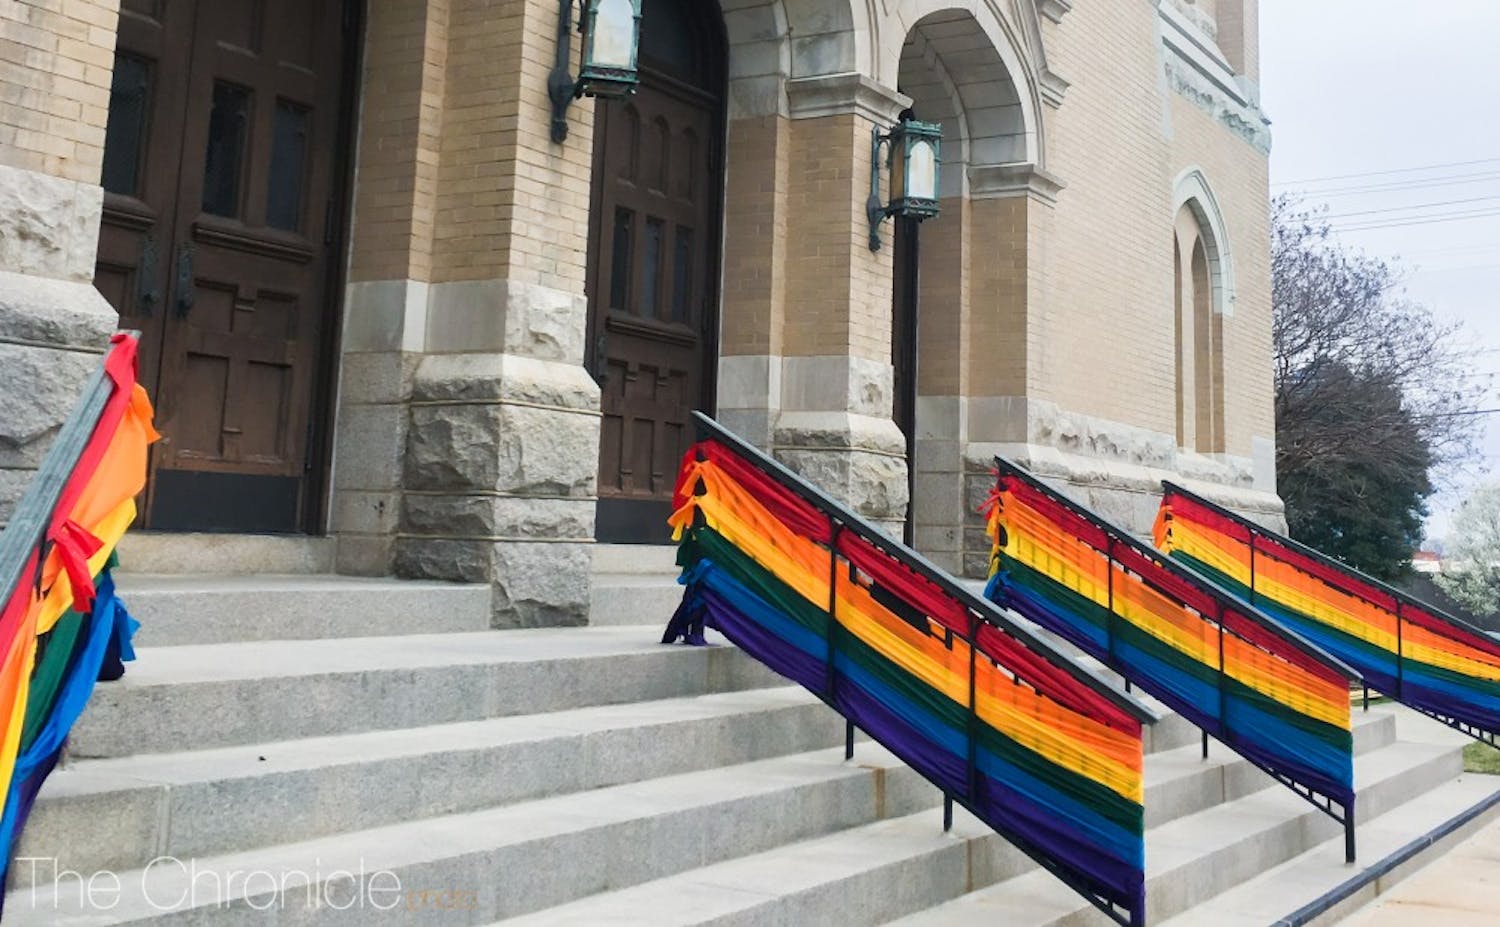 The United Methodist Church voted in February to prohibit same-sex marriages in their churches.